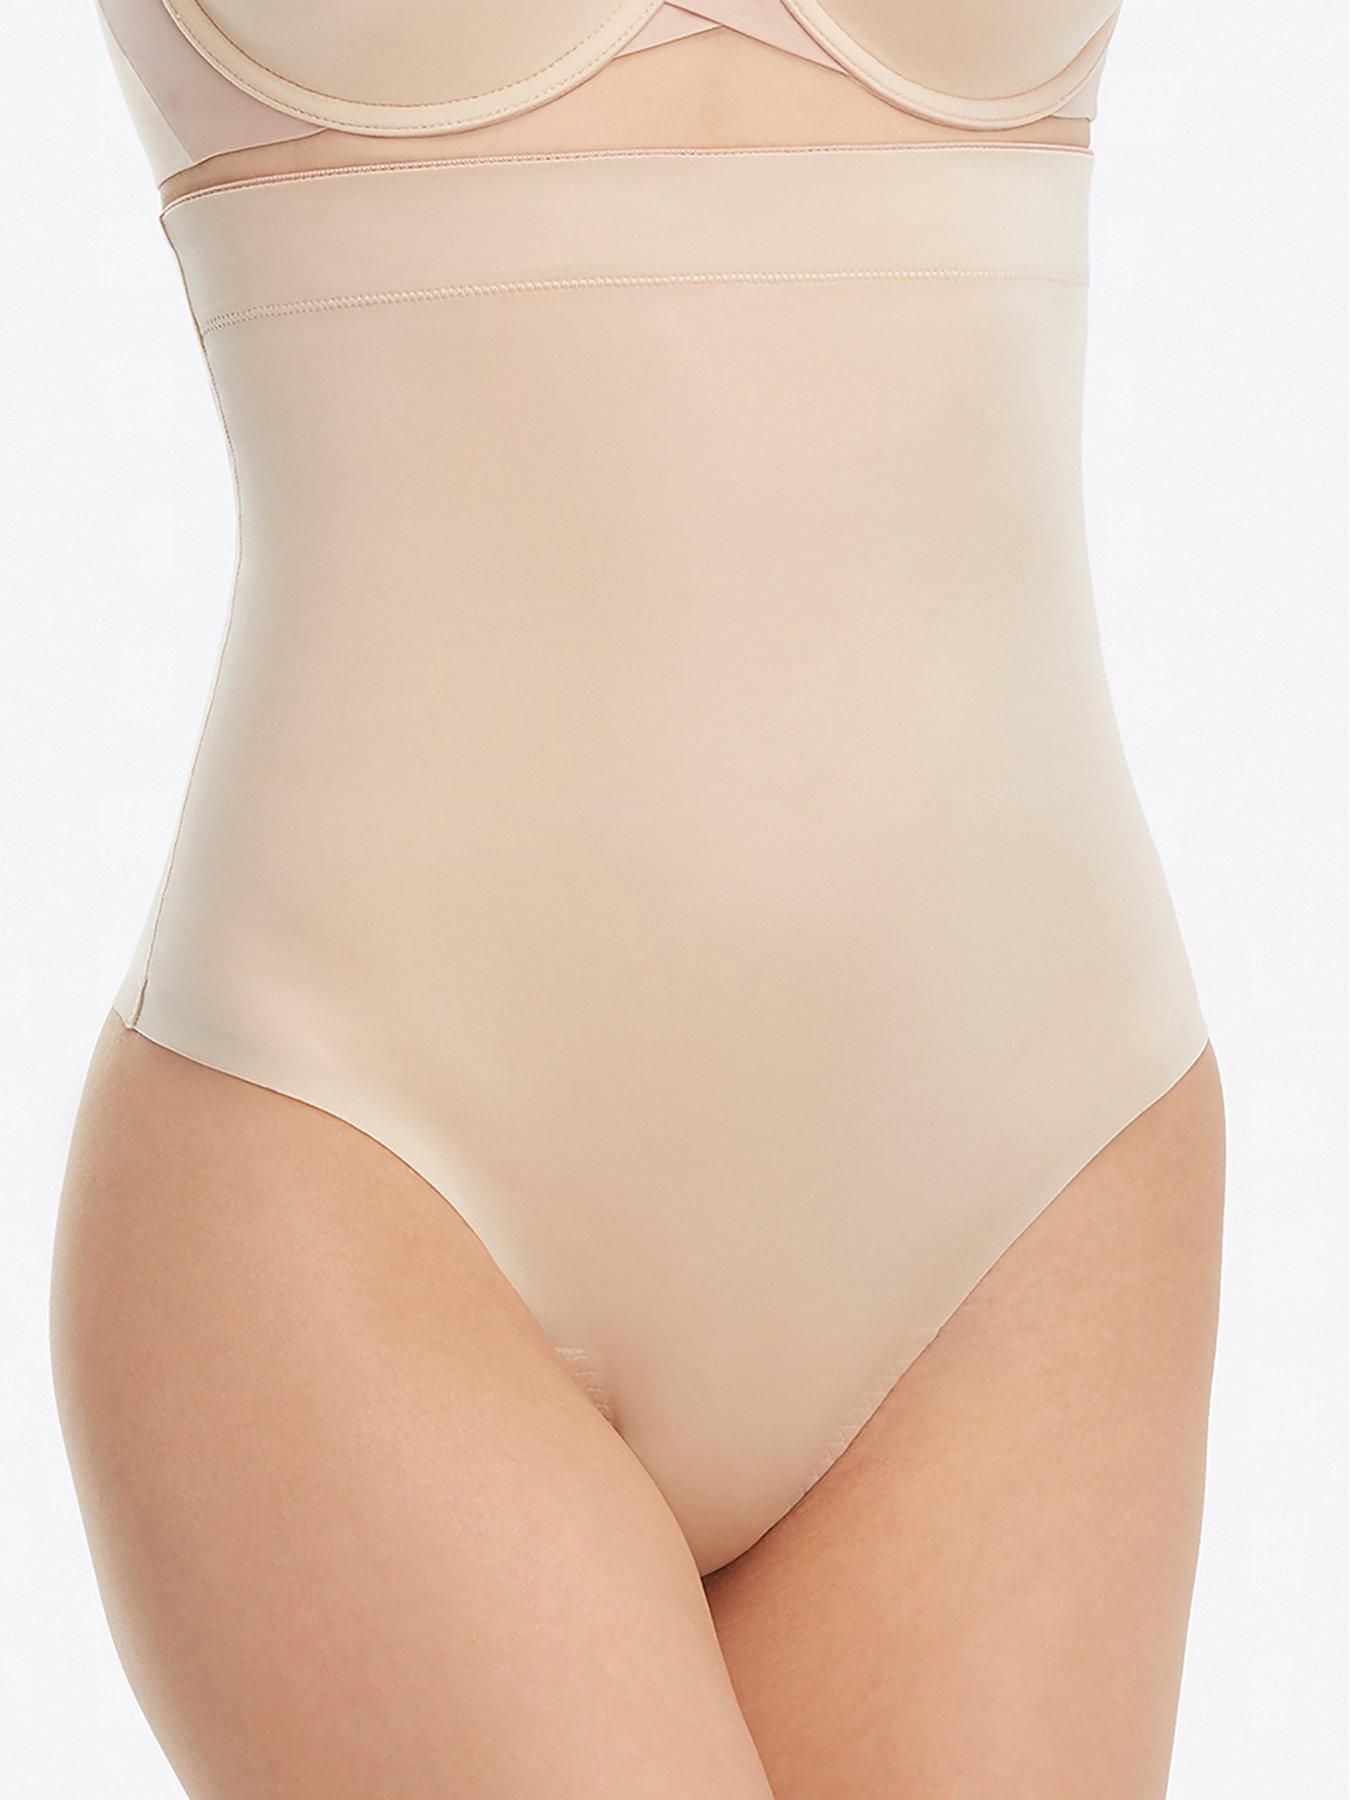 SPANX suit me fancy thong shaper .Small nude